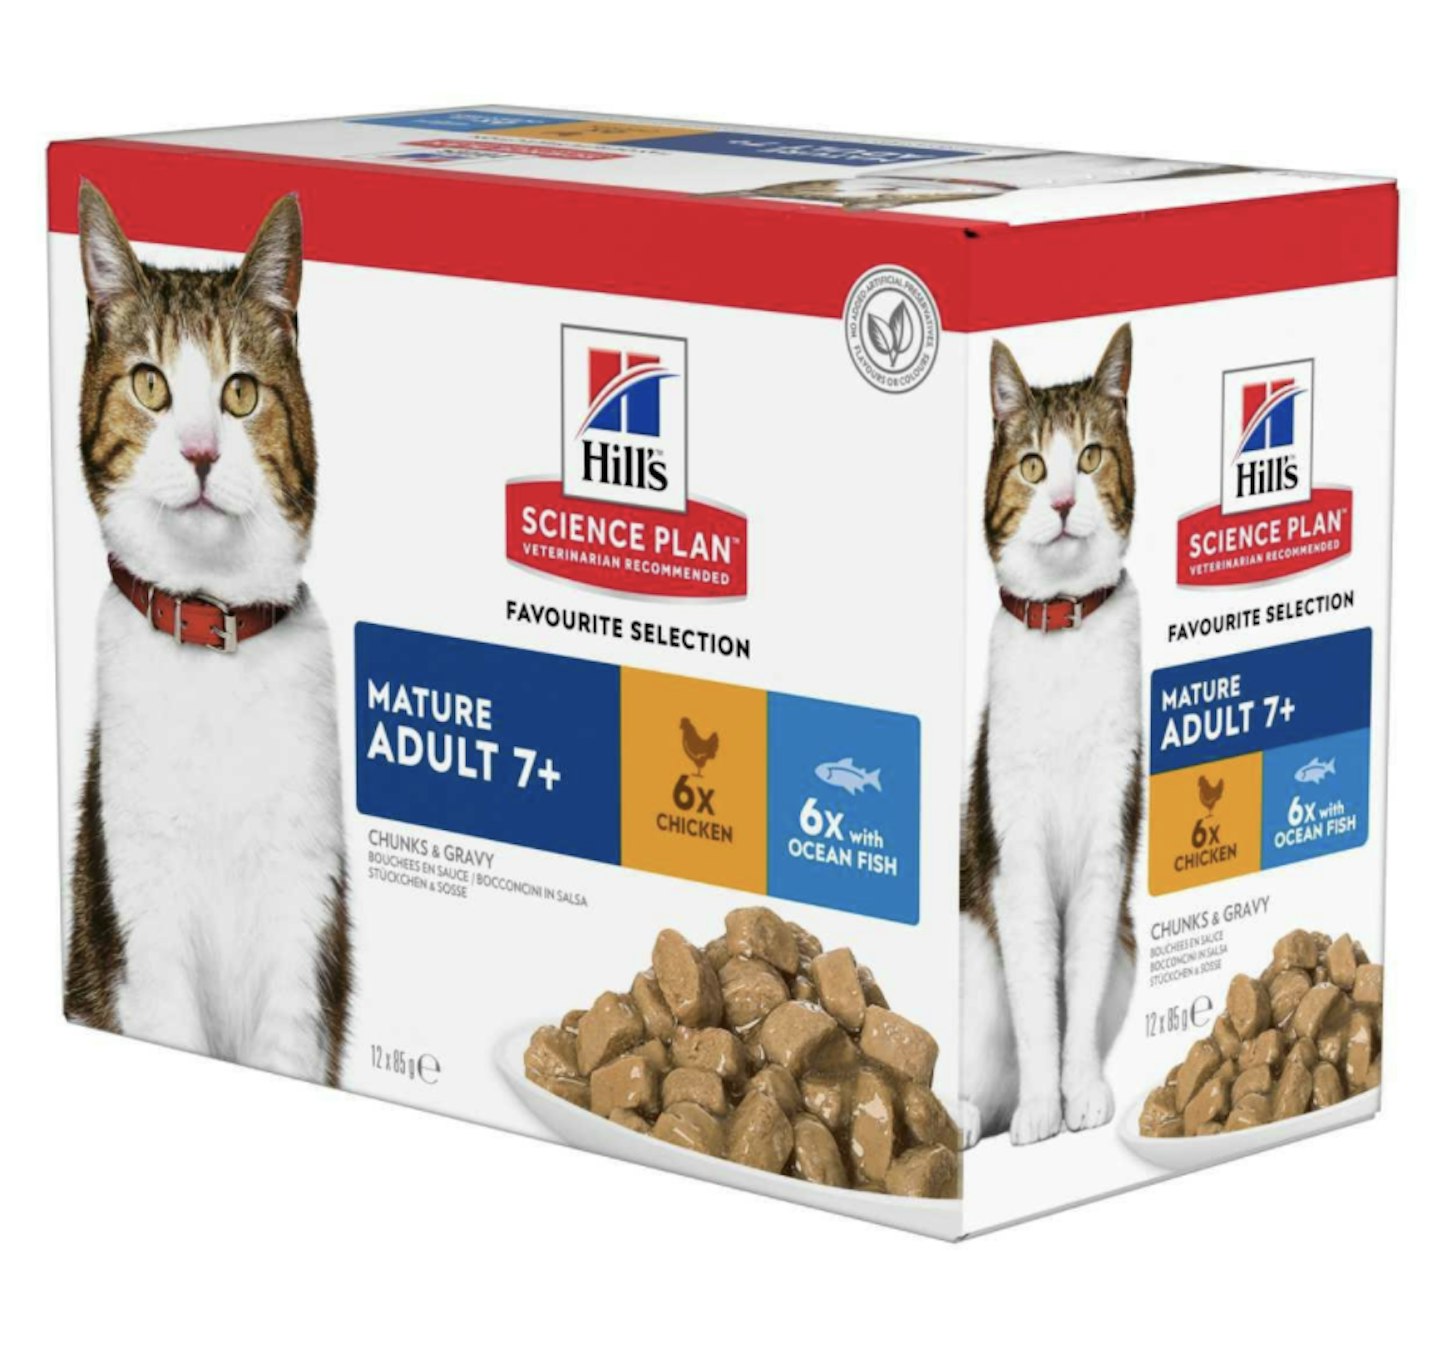 Hill's Science Plan Mature Adult Multipack Wet Cat Food